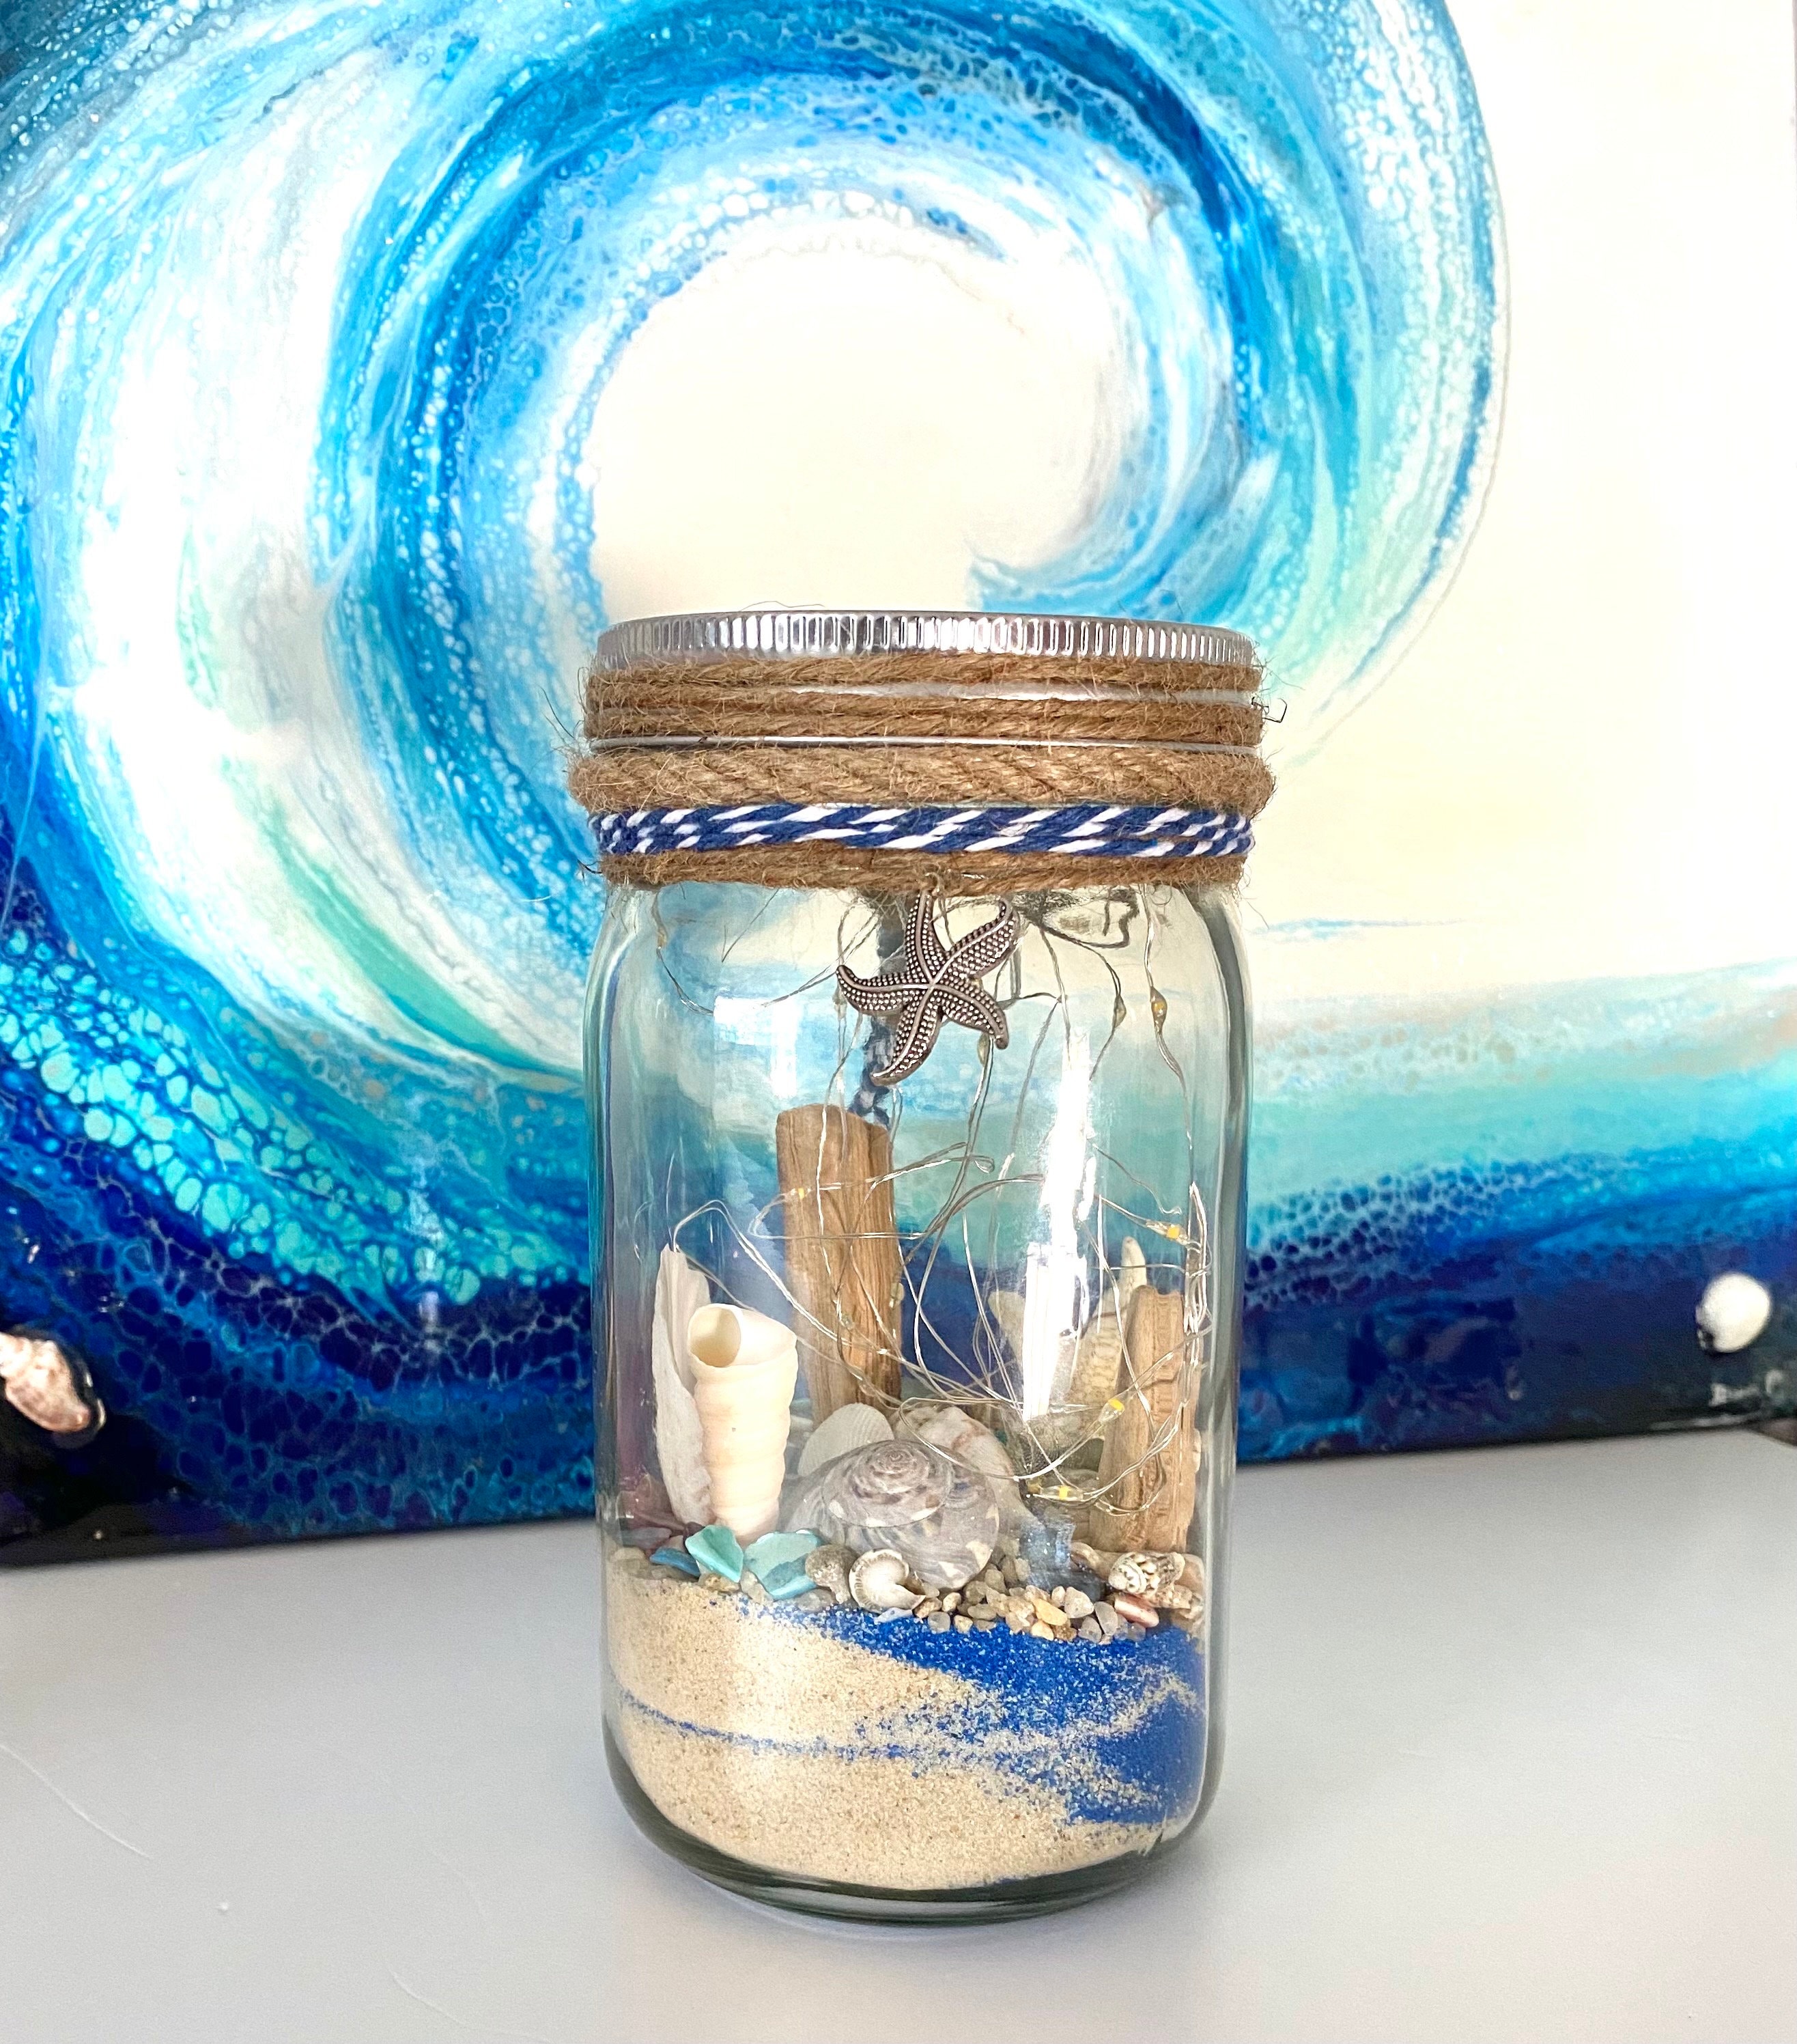 Handcrafted Sea shell Jar Beach Inspired Home Decor with Natural Sea shells